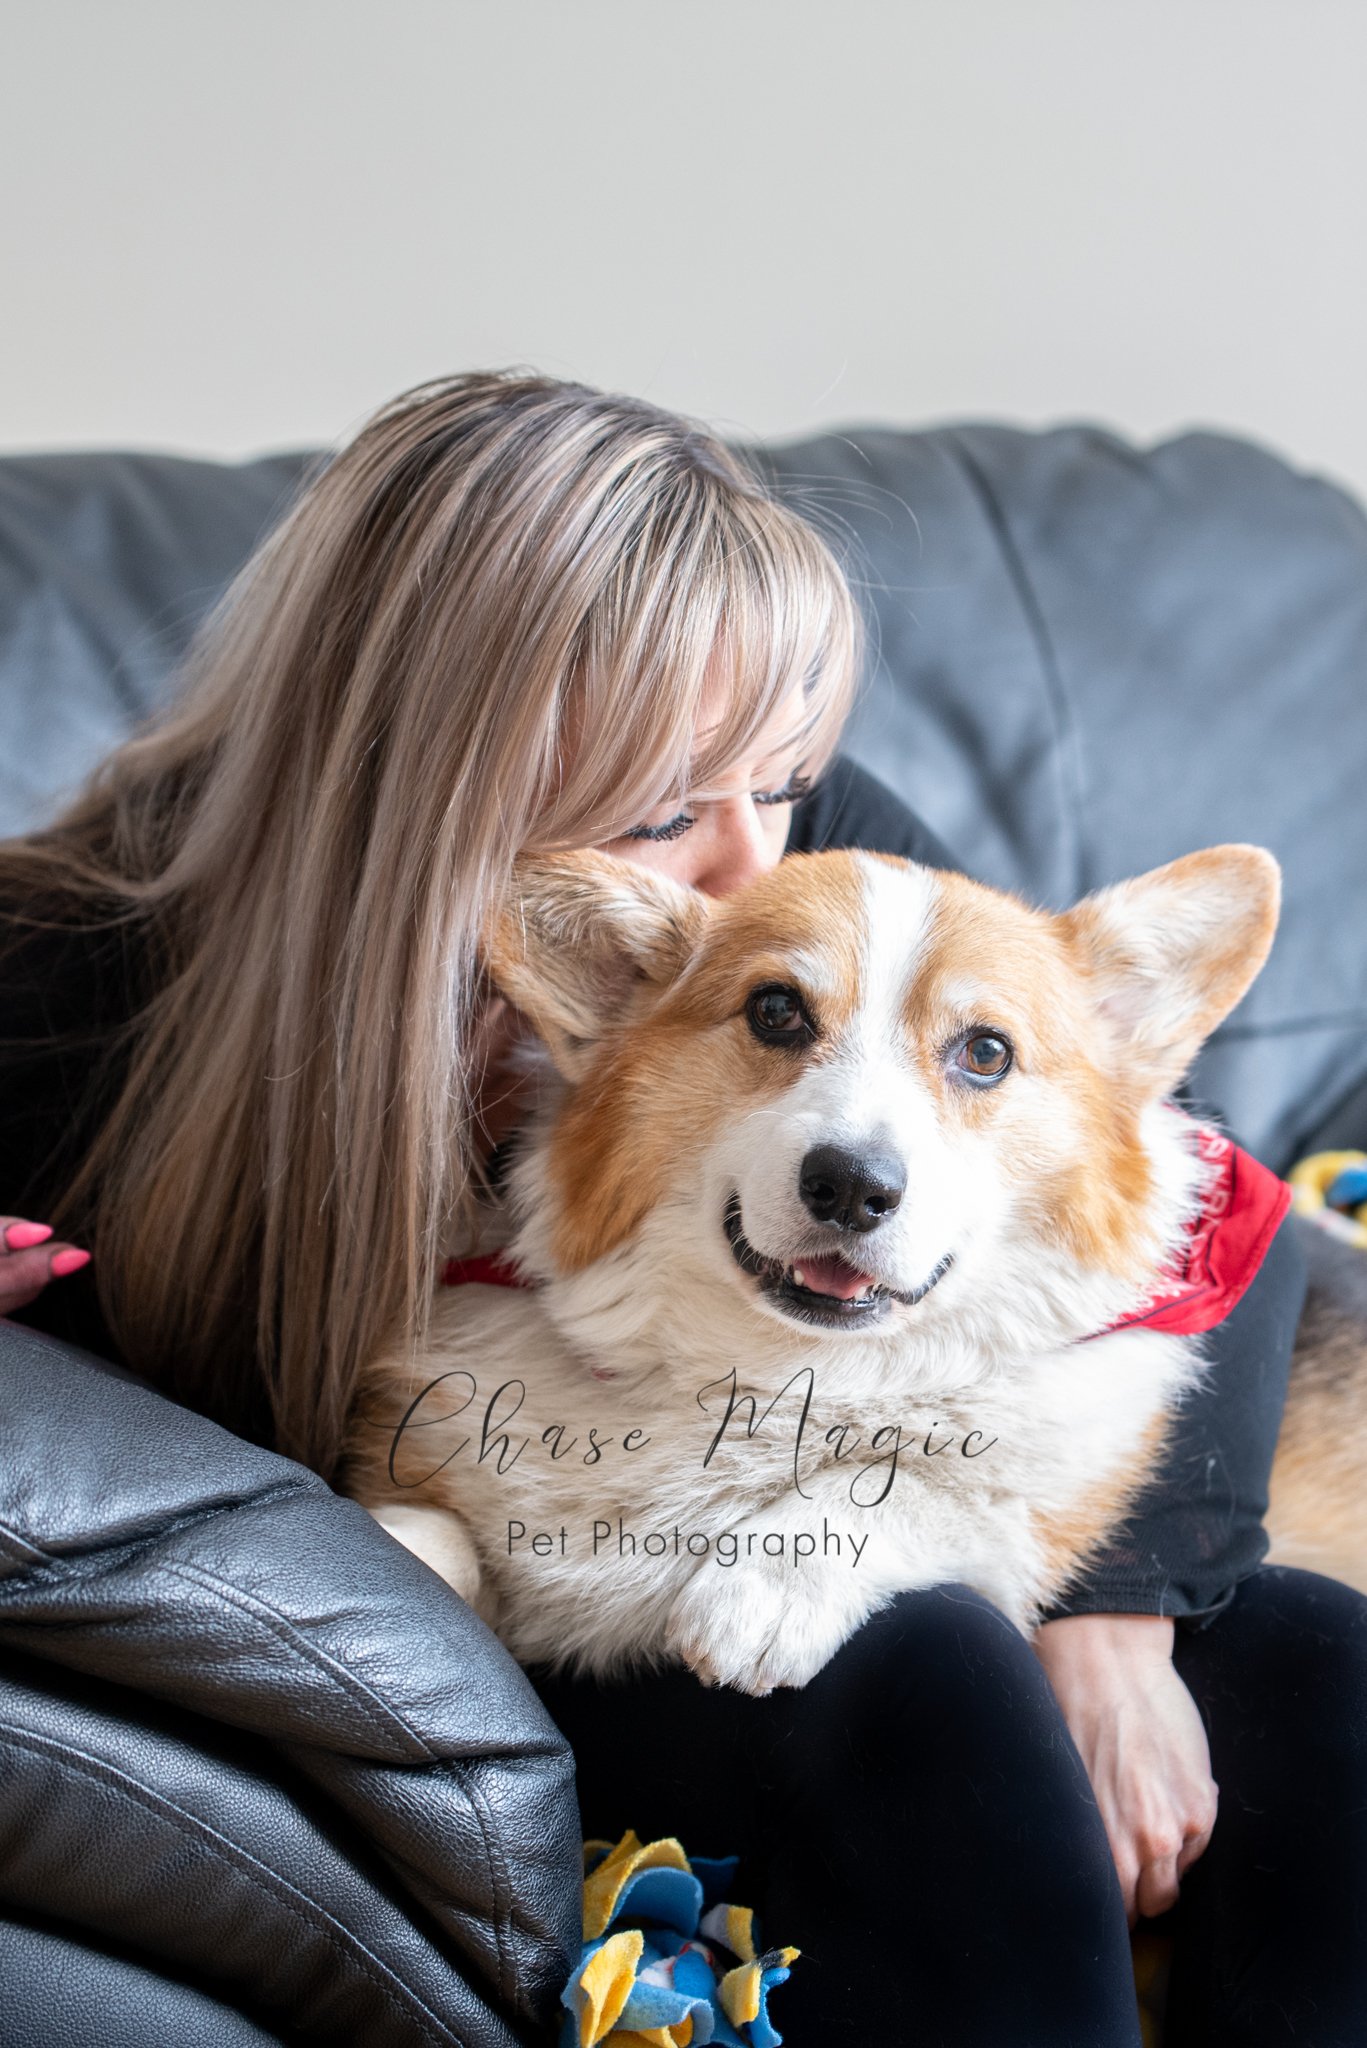 Fluffy Corgi getting kisses from its owner on the sofa couch